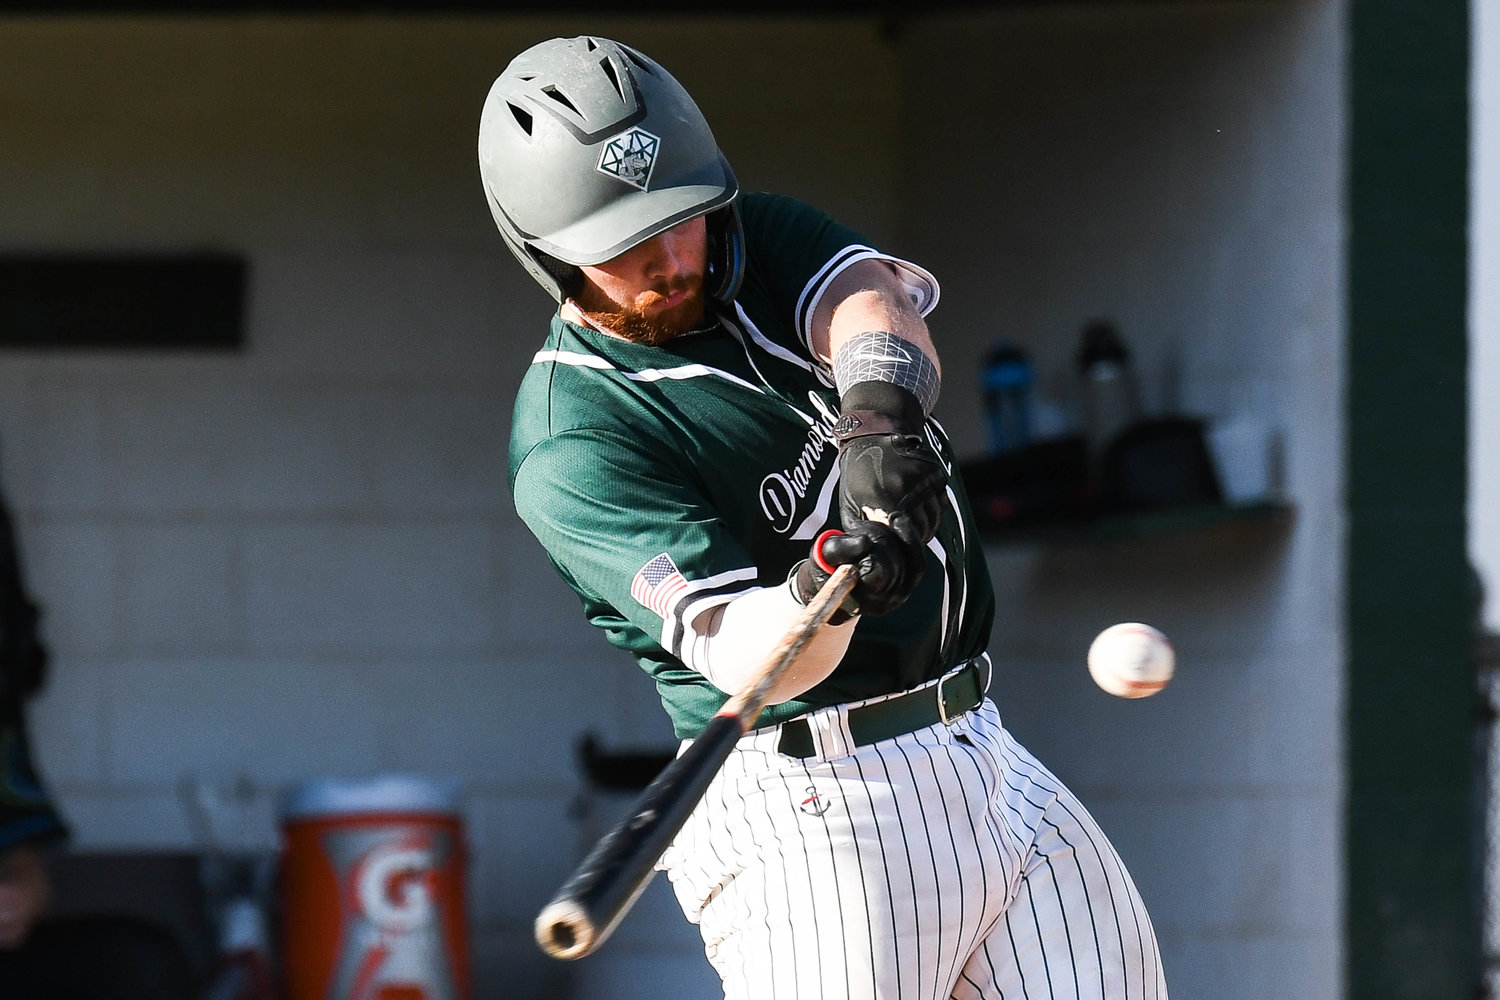 Marshall Awtry of the Mohawk Valley DiamondDawgs swings at a pitch during the the first game of a doubleheader against Jamestown on Wednesday at home. The Dawgs swept the two games, winning 4-0 and 11-1.